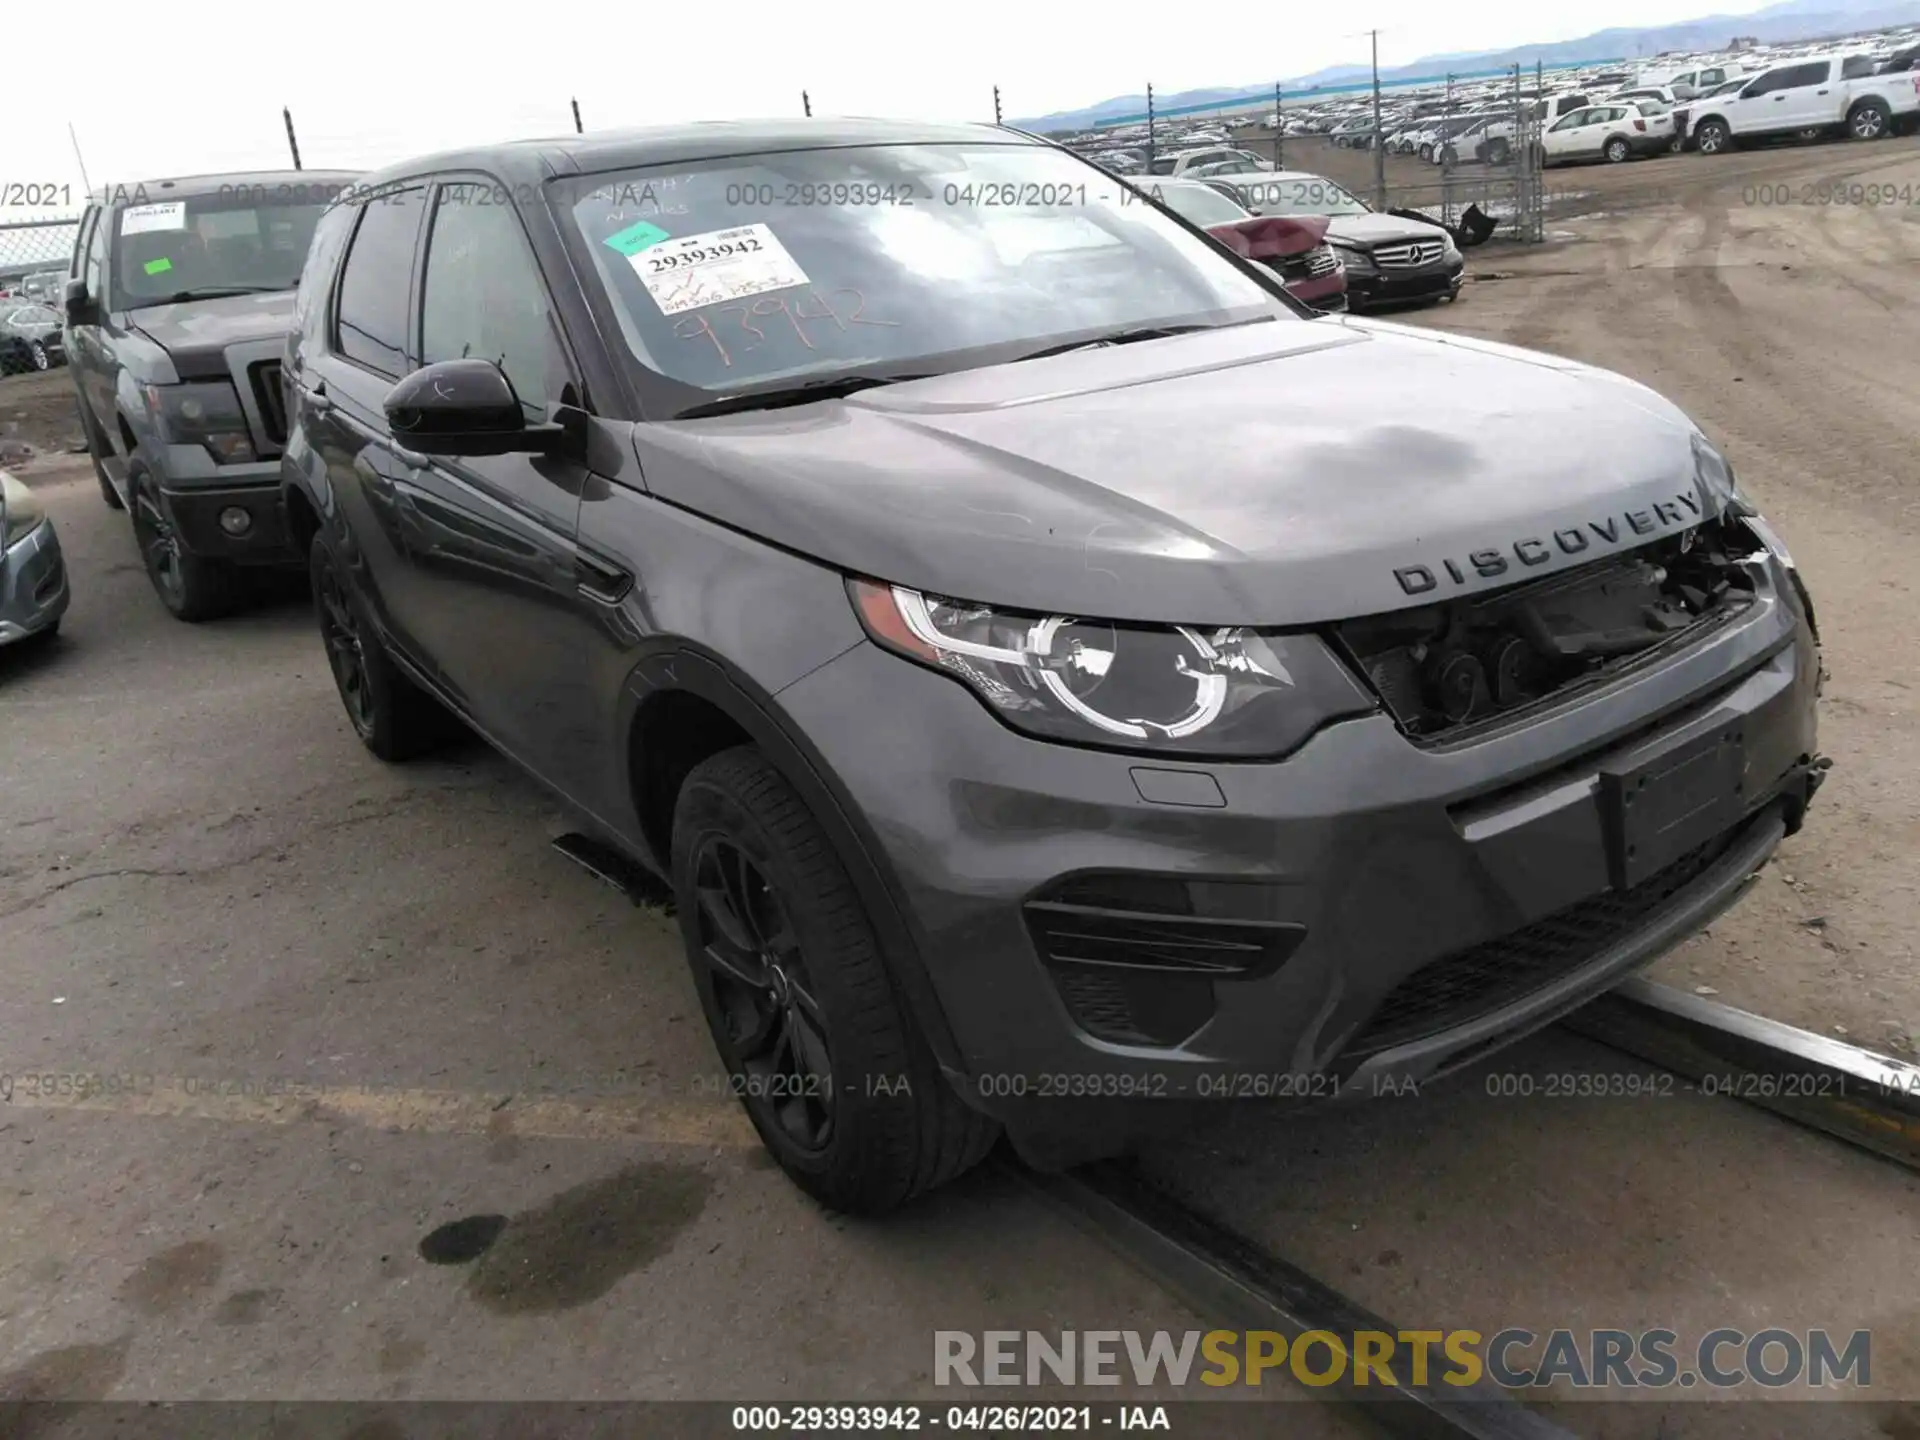 1 Photograph of a damaged car SALCP2FX9KH795815 LAND ROVER DISCOVERY SPORT 2019